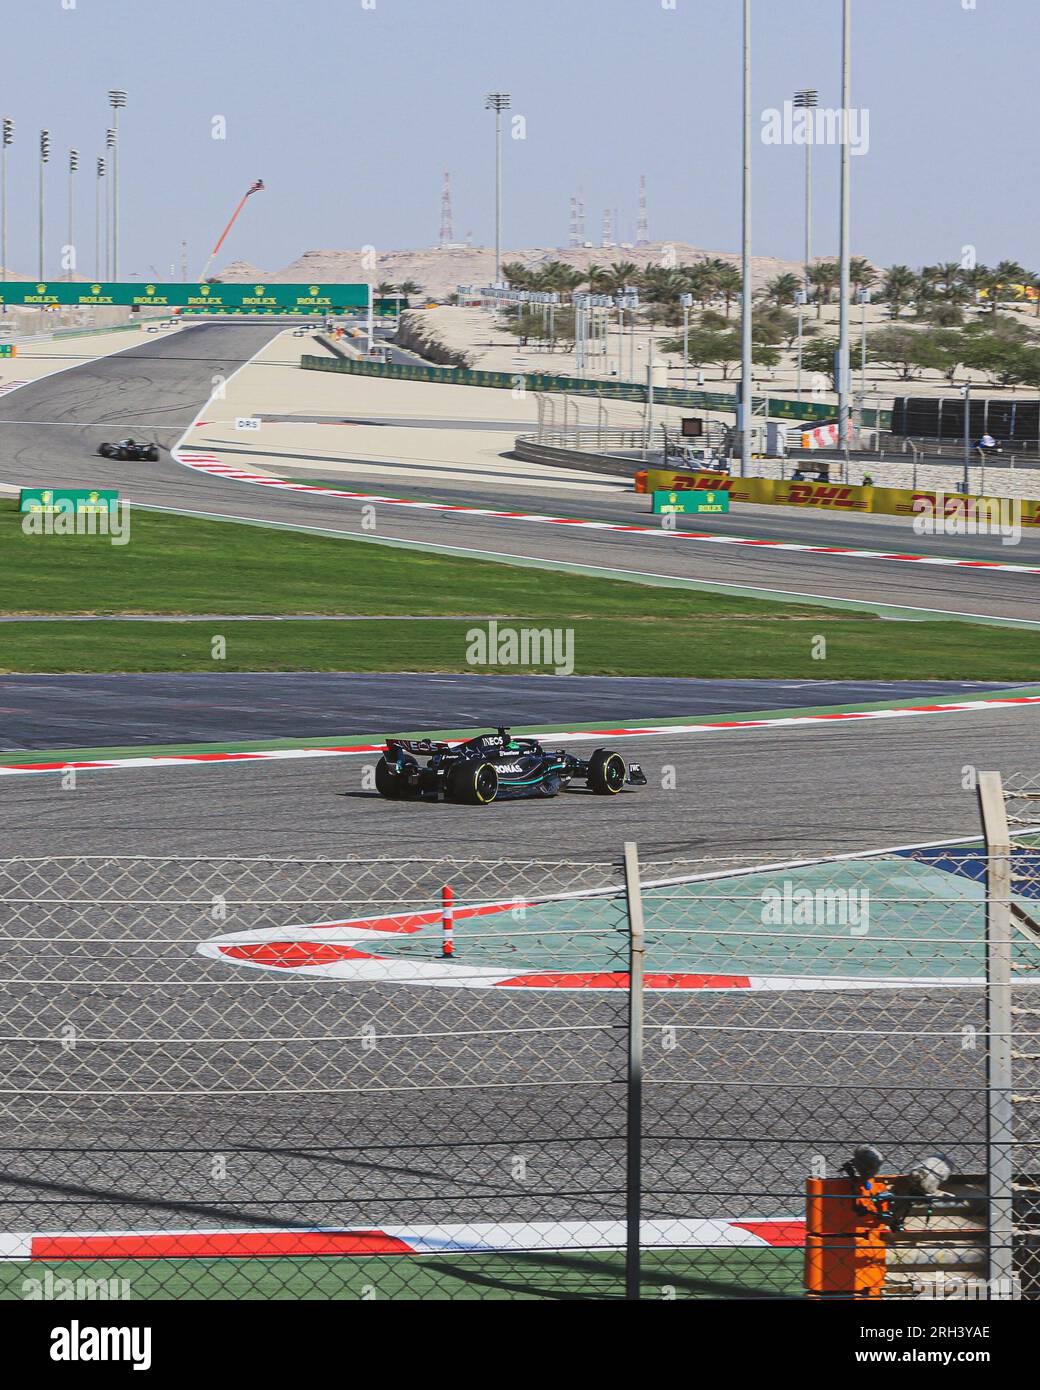 George Russell of Mercedes - 2023 Bahrain Grand Prix Free Practice session Stock Photo